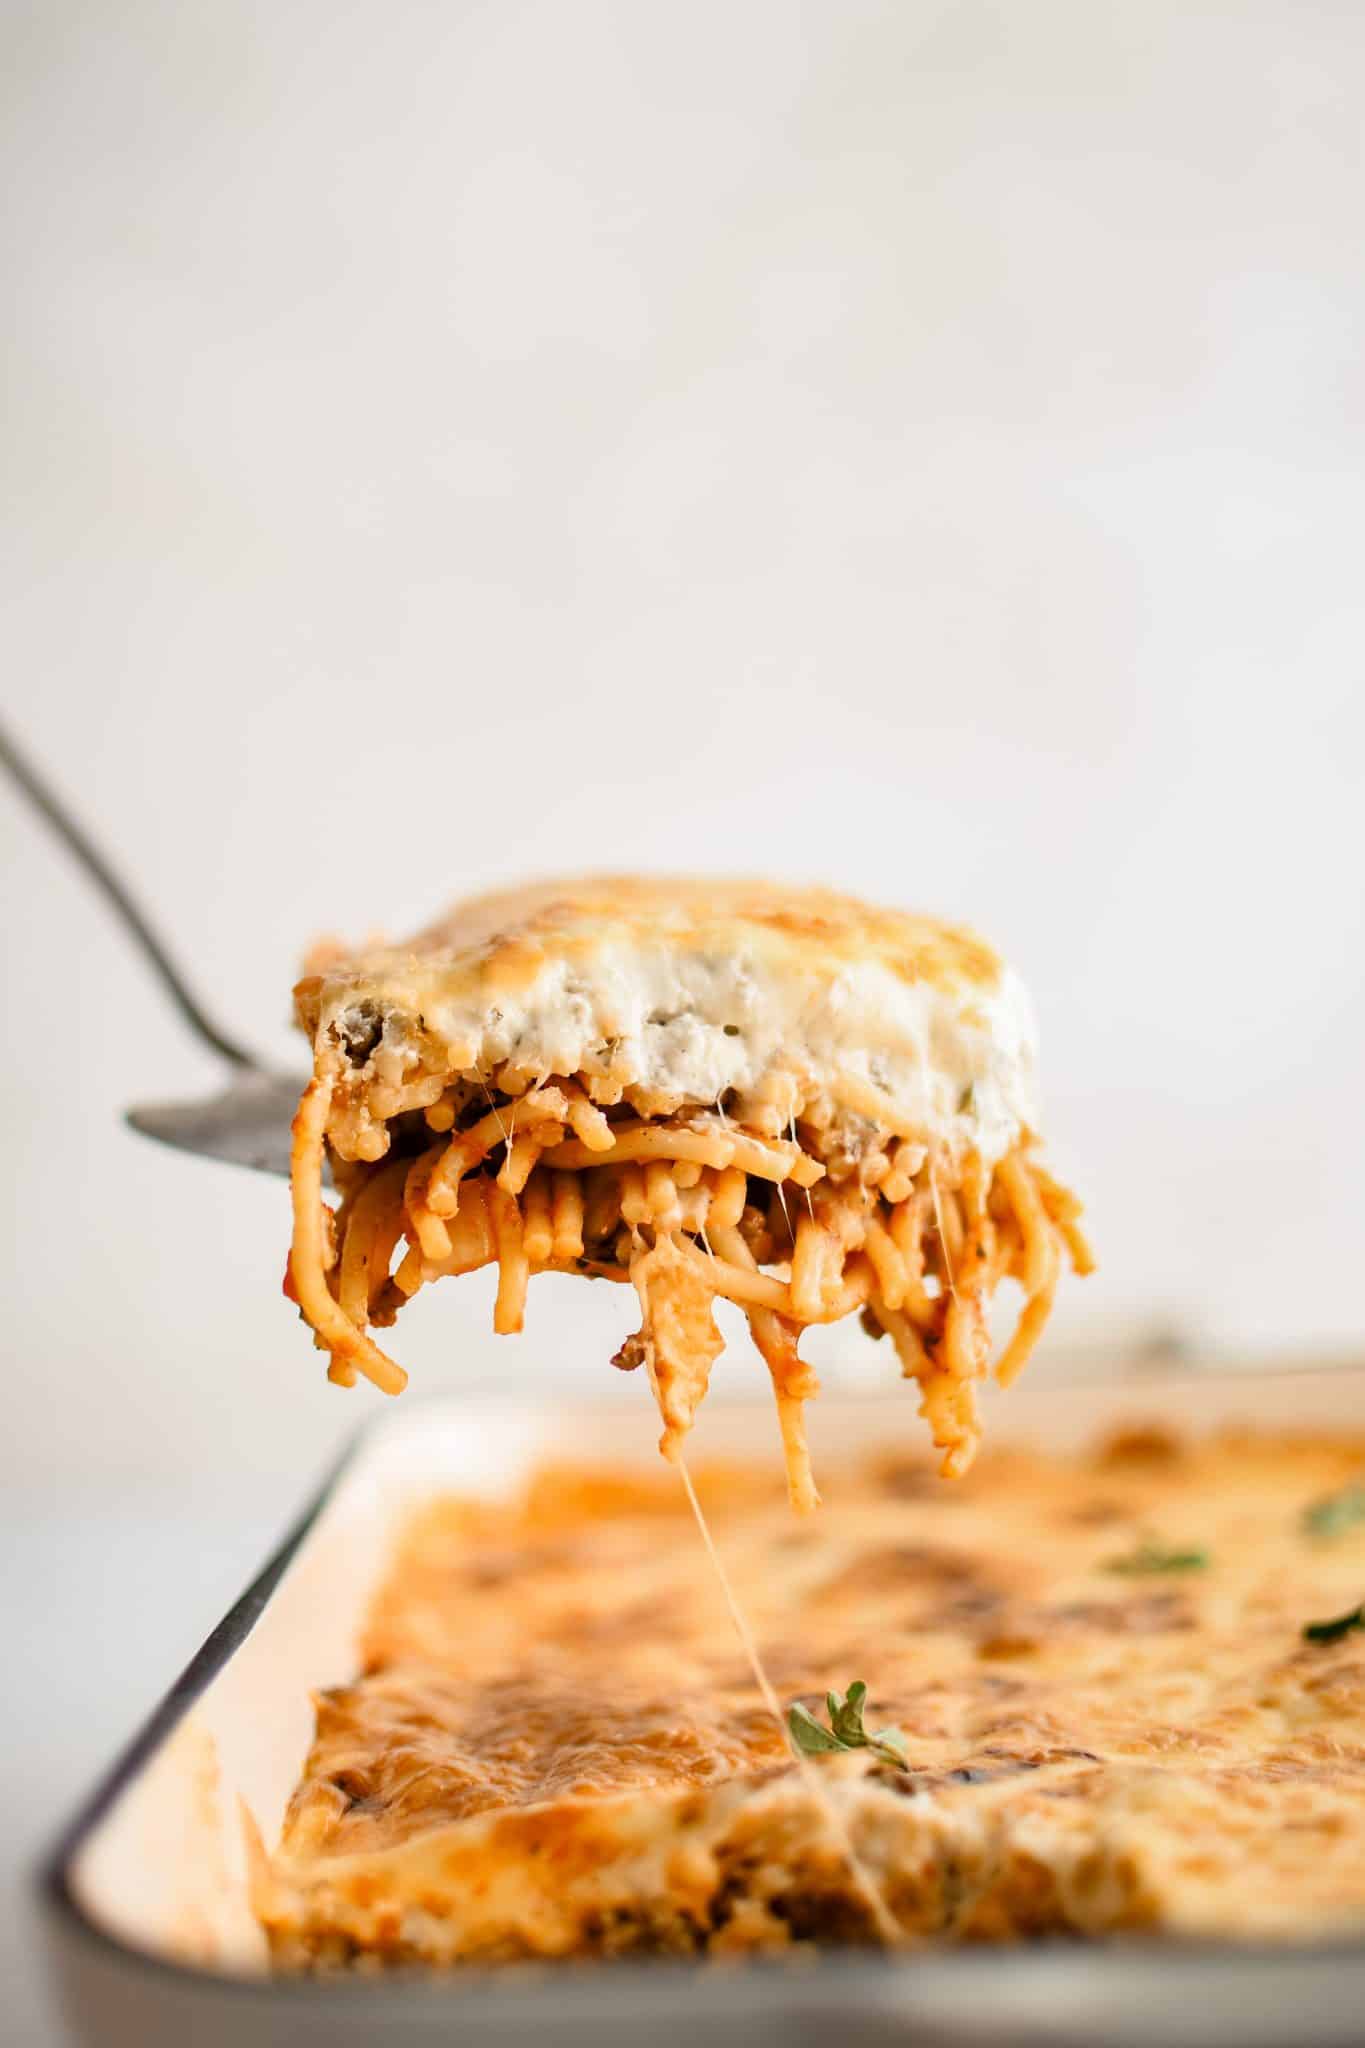 Metal Spatula with a slice of spaghetti casserole showing the layer of spaghetti sauce covered noodles and cream cheese layer floating above a large casserole dish filled with spaghetti casserole